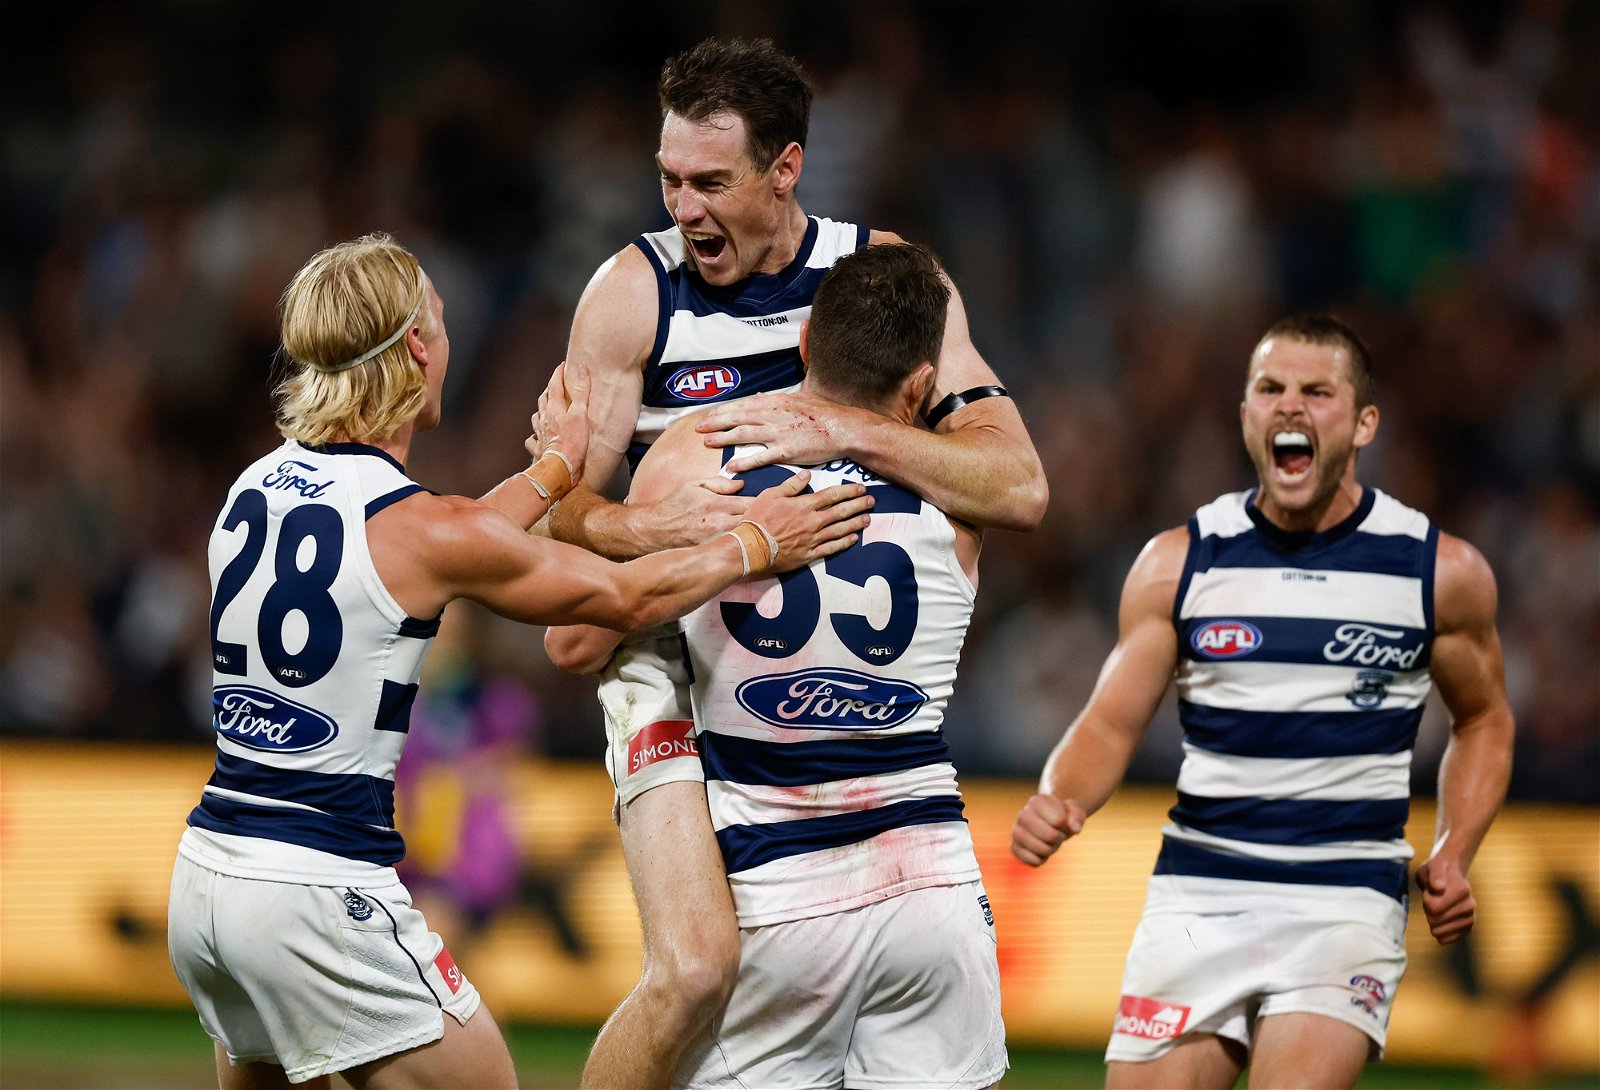 Patrick Dangerfield (35) celebrates a goal for Geelong against St Kilda.